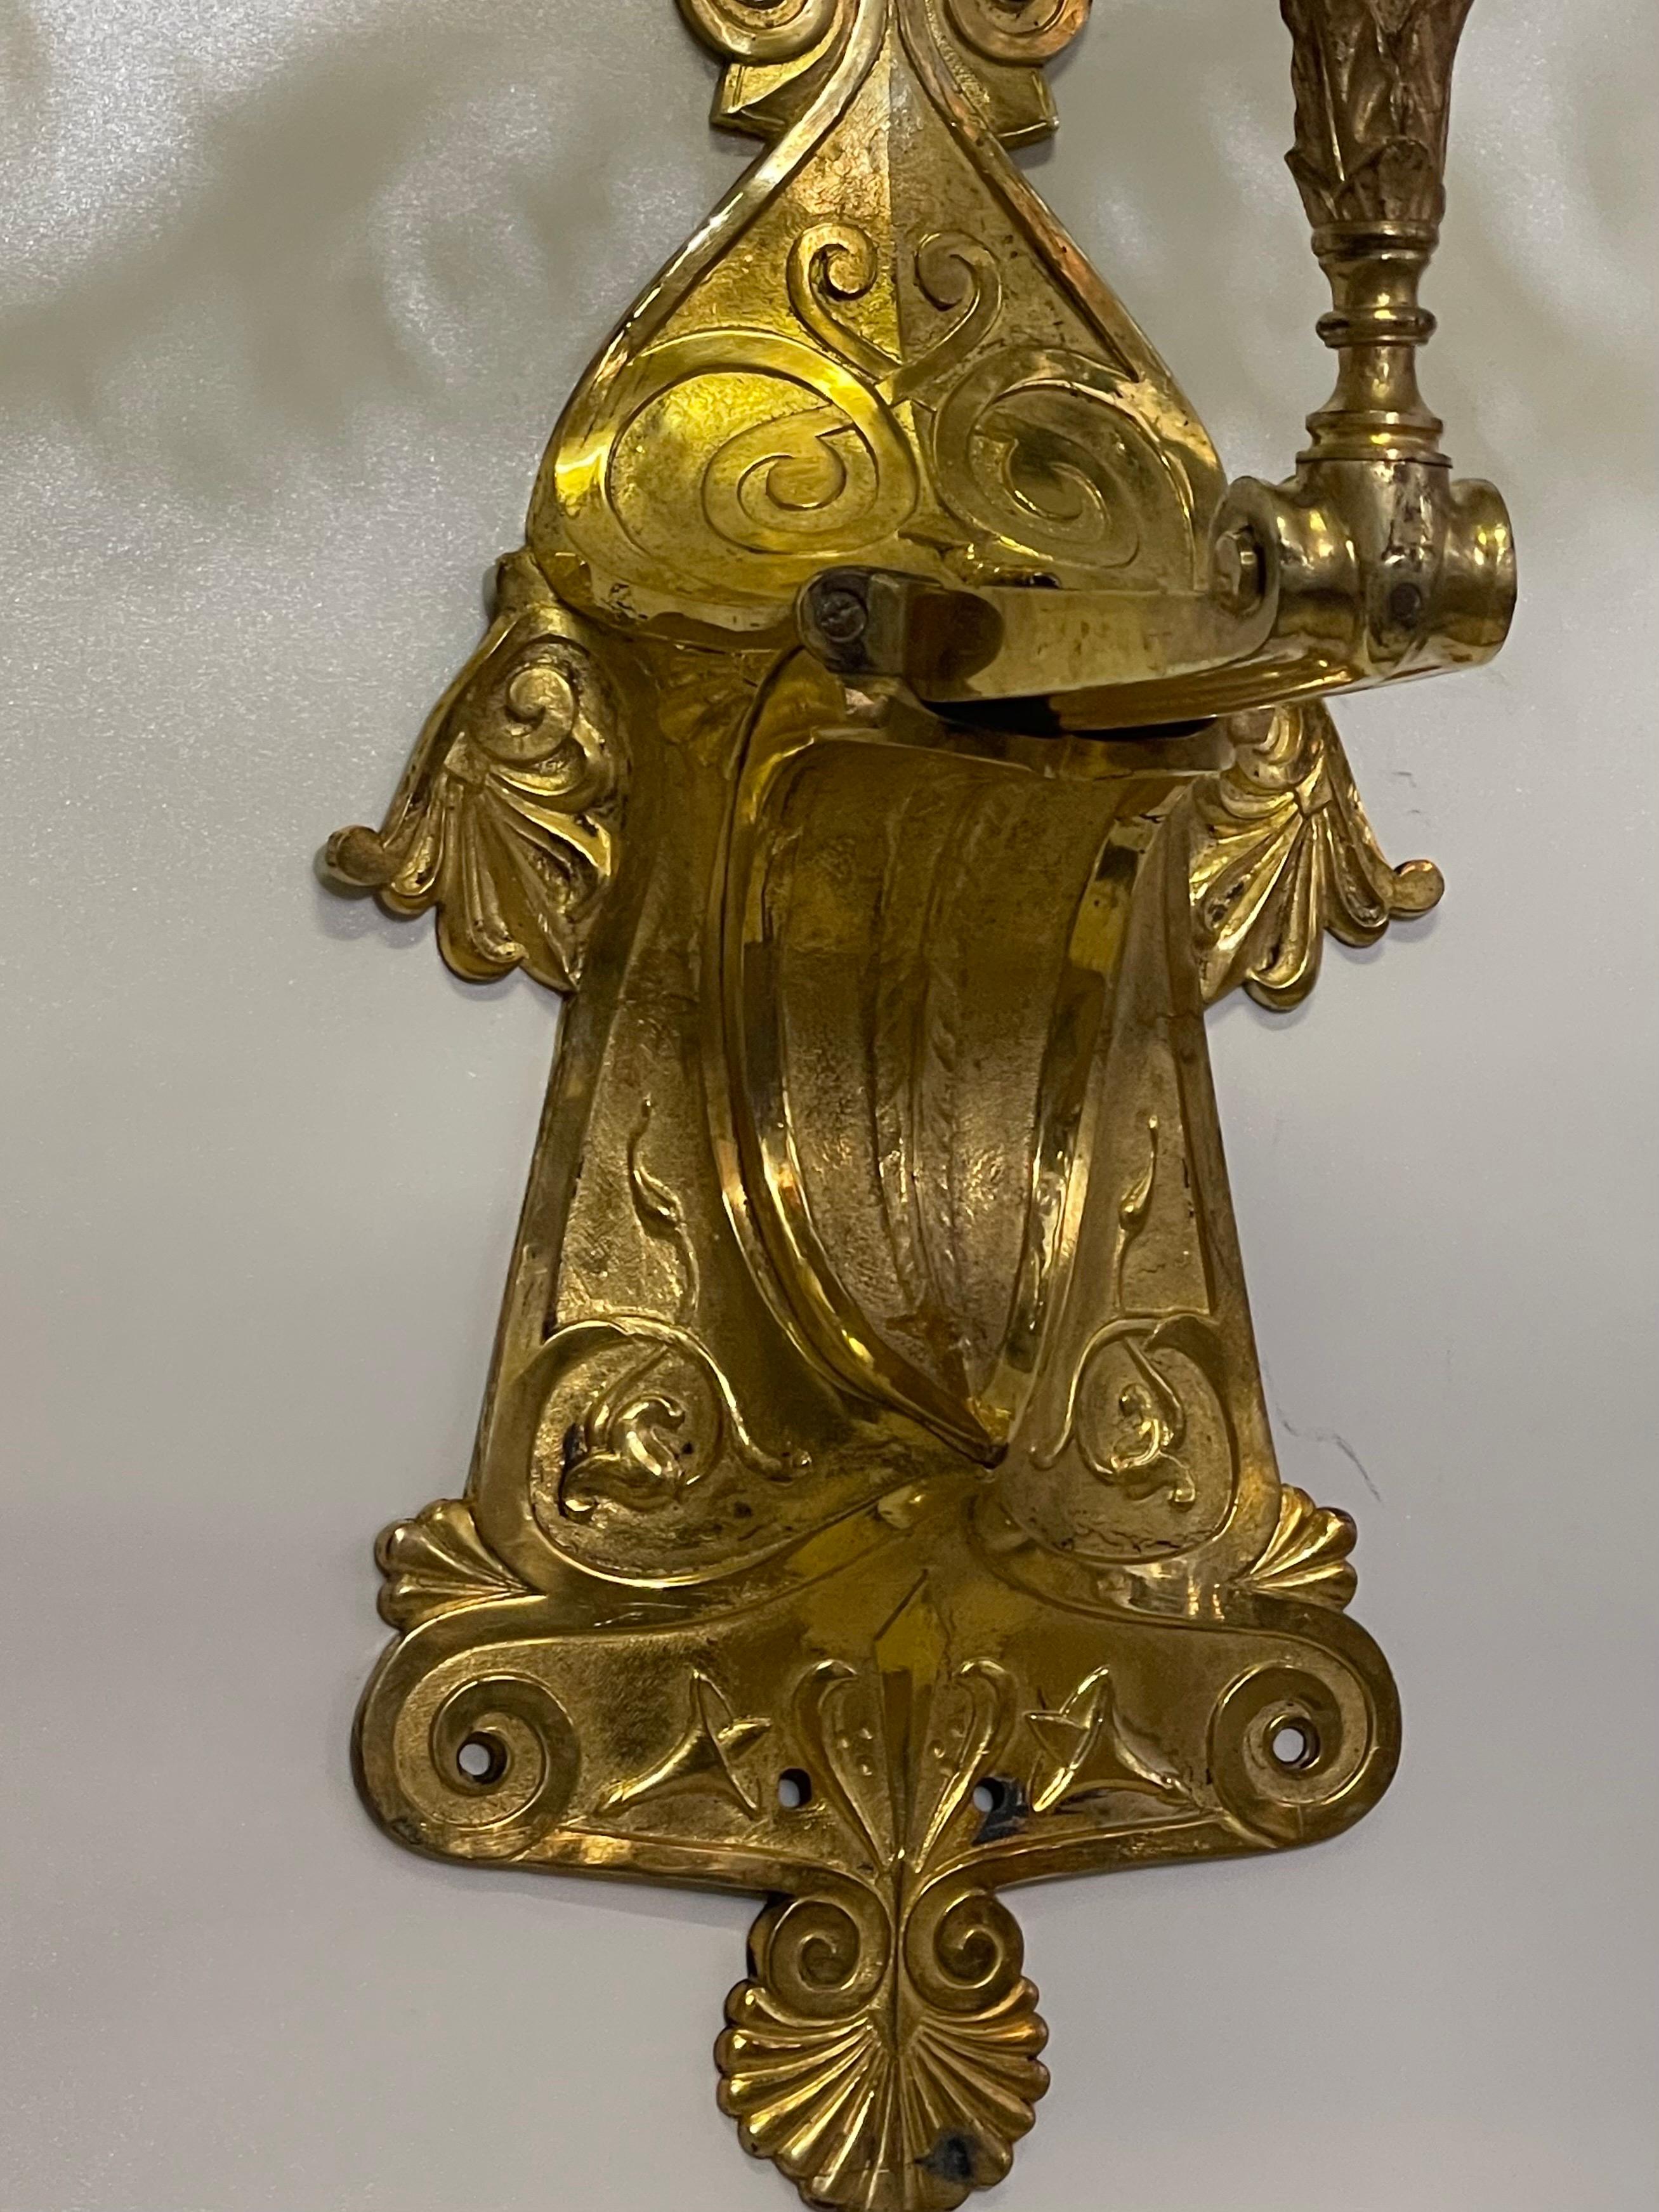 Pair of Stunning Russian Empire Period Ormolu Wall Sconces , ca. 1820s In Excellent Condition For Sale In Wiesbaden, Hessen